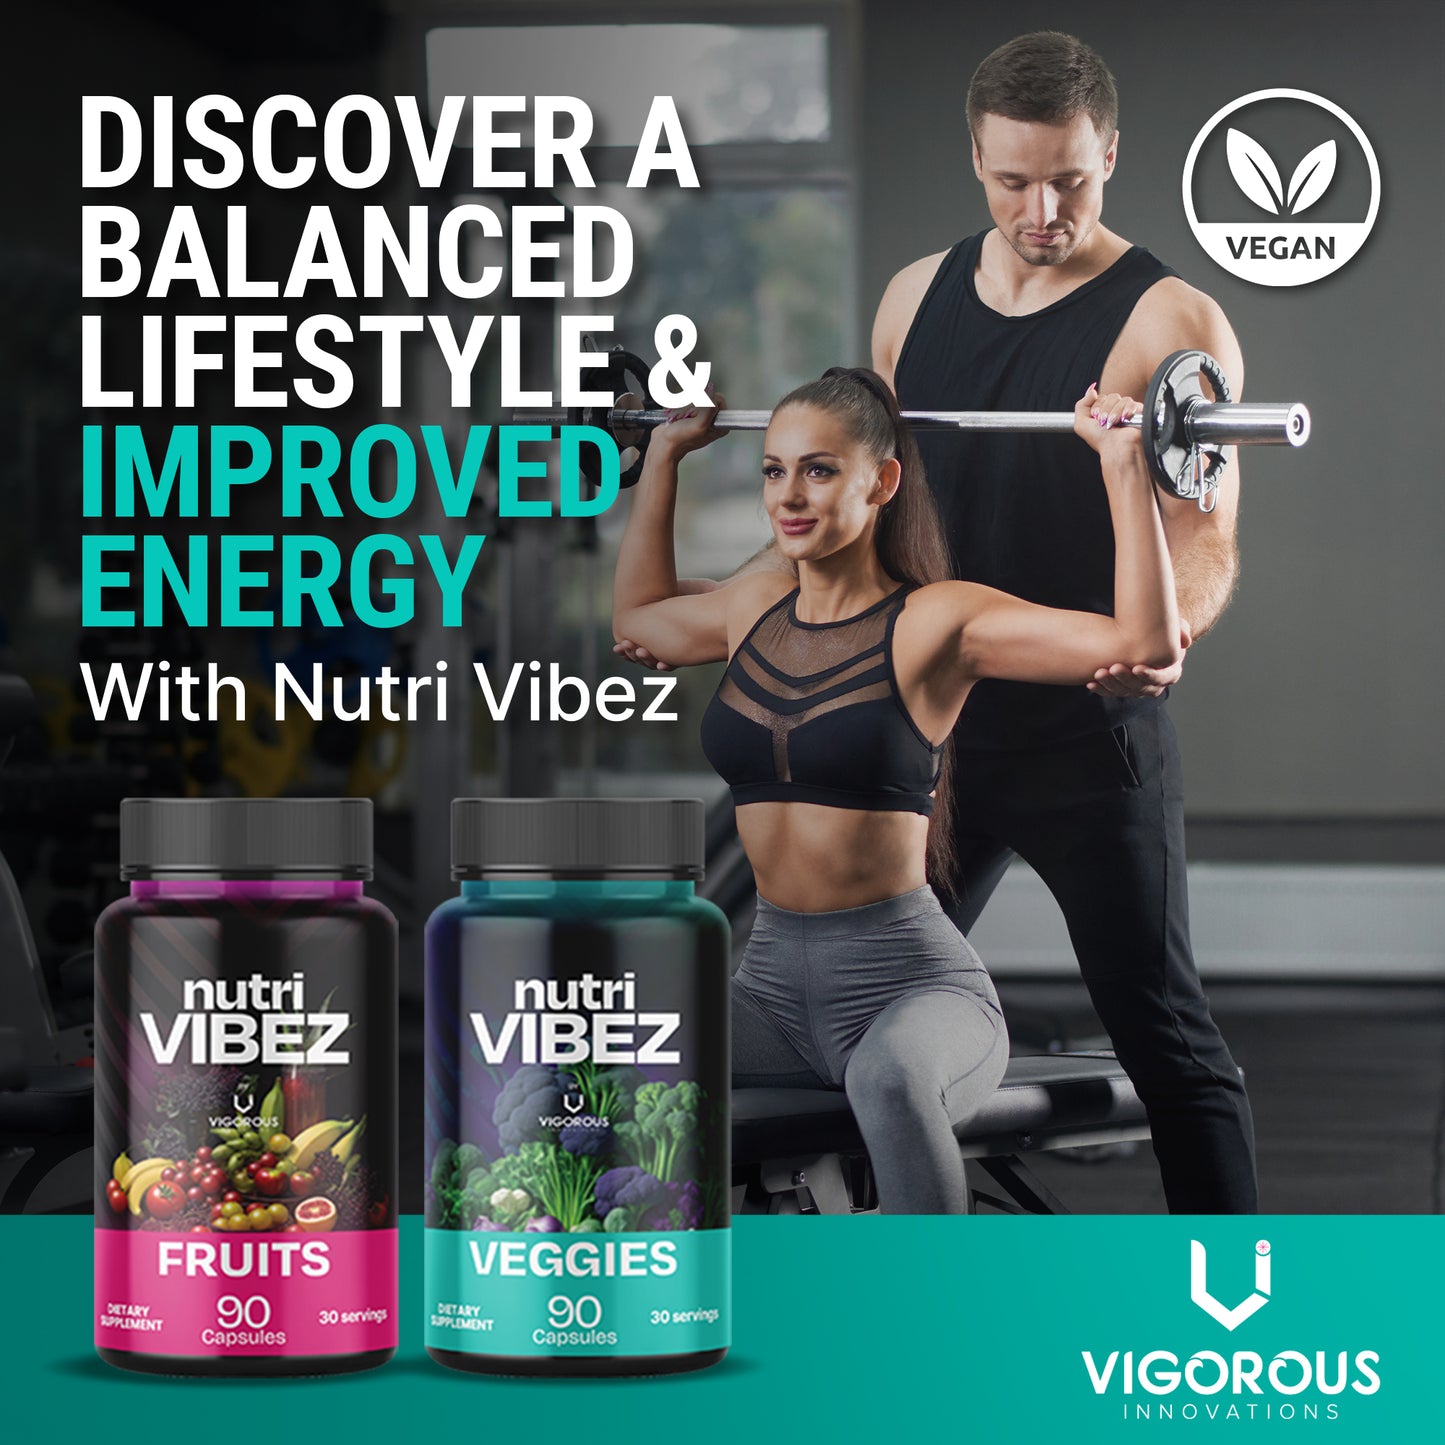 Nutri Vibez Fruits and Veggies Supplement - Whole Produce Fruit and Vegetable Supplement